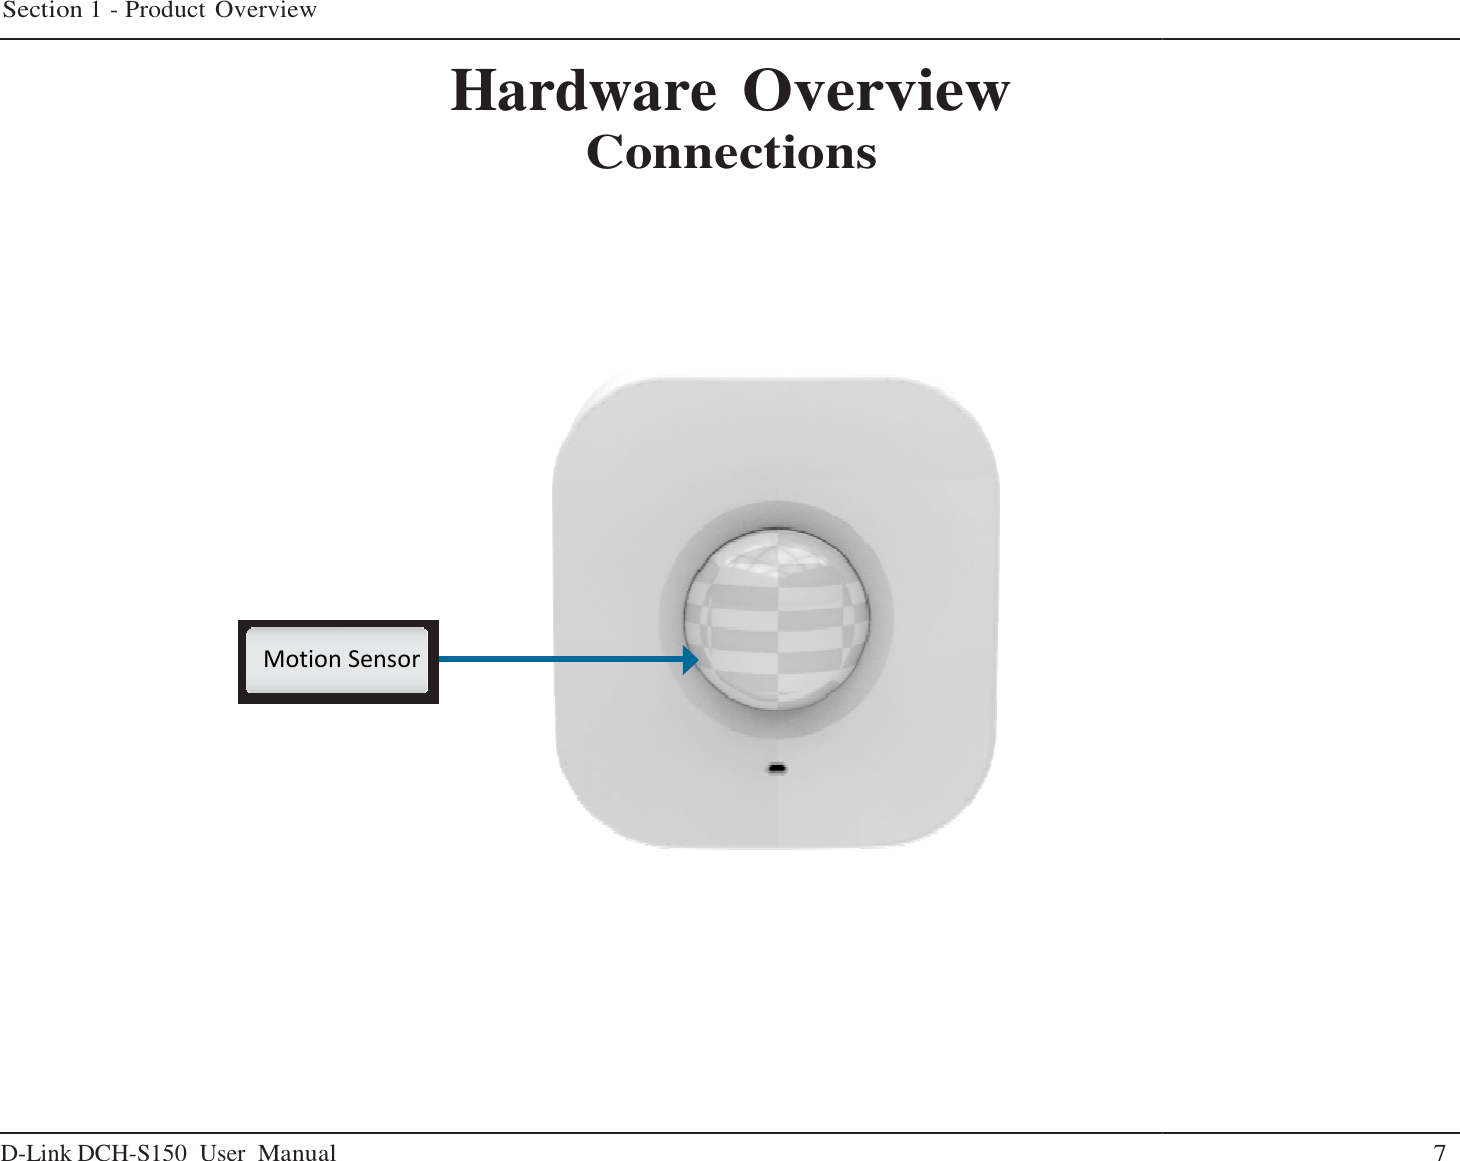 D-Link DCH-S150  User Manual Section 1 - Product Overview     Hardware                         Motion Sensor                        Hardware Overview Connections 7 